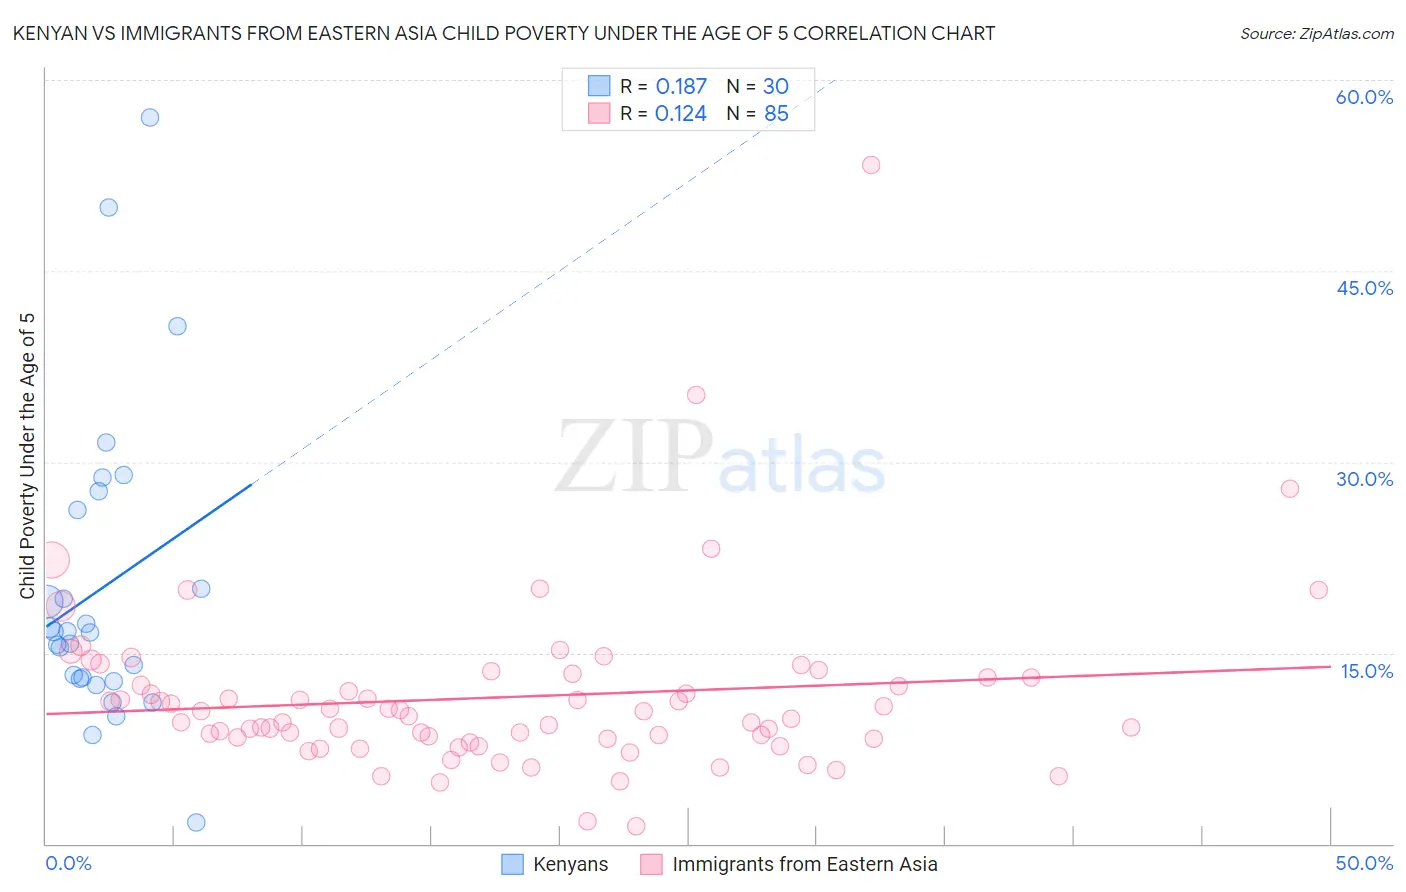 Kenyan vs Immigrants from Eastern Asia Child Poverty Under the Age of 5